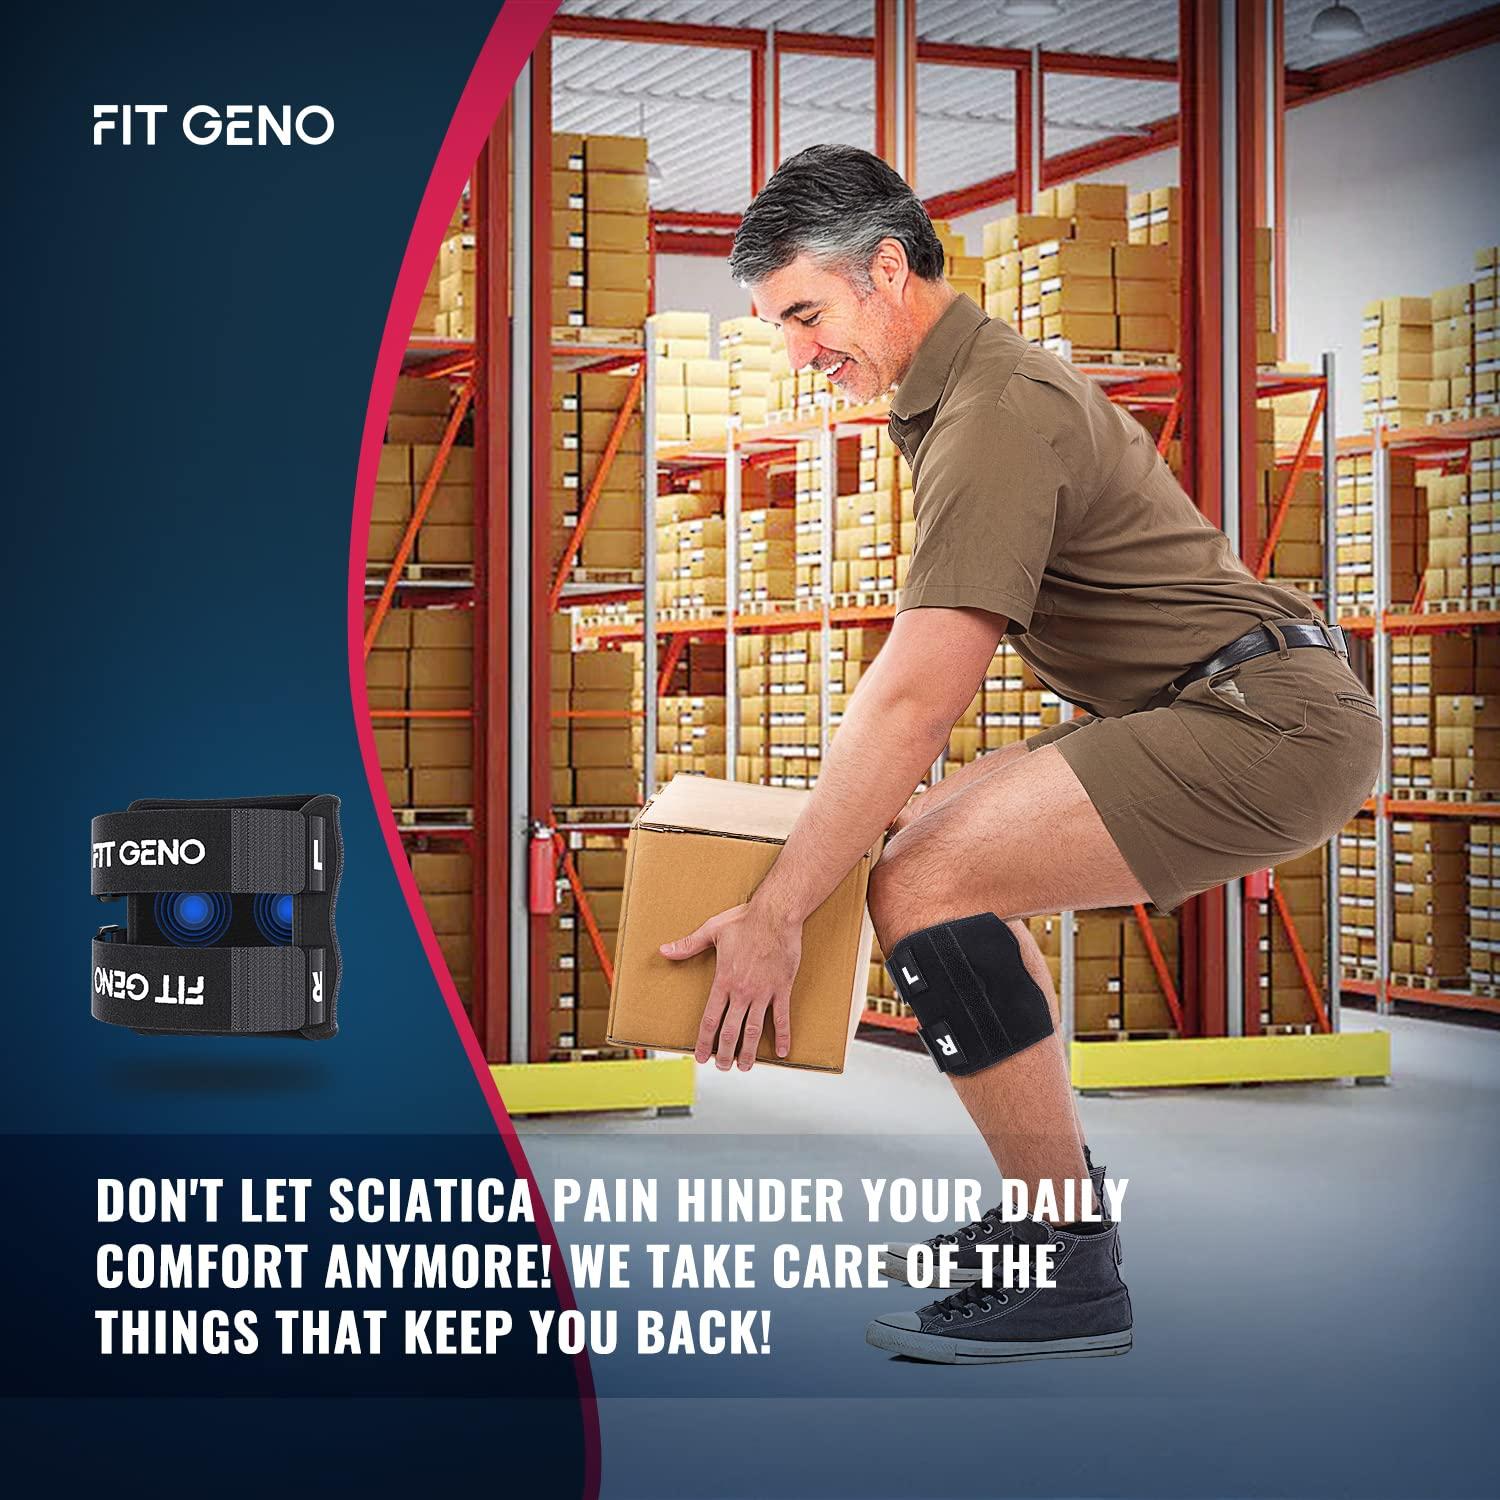 Back Pain Relief - FitGeno